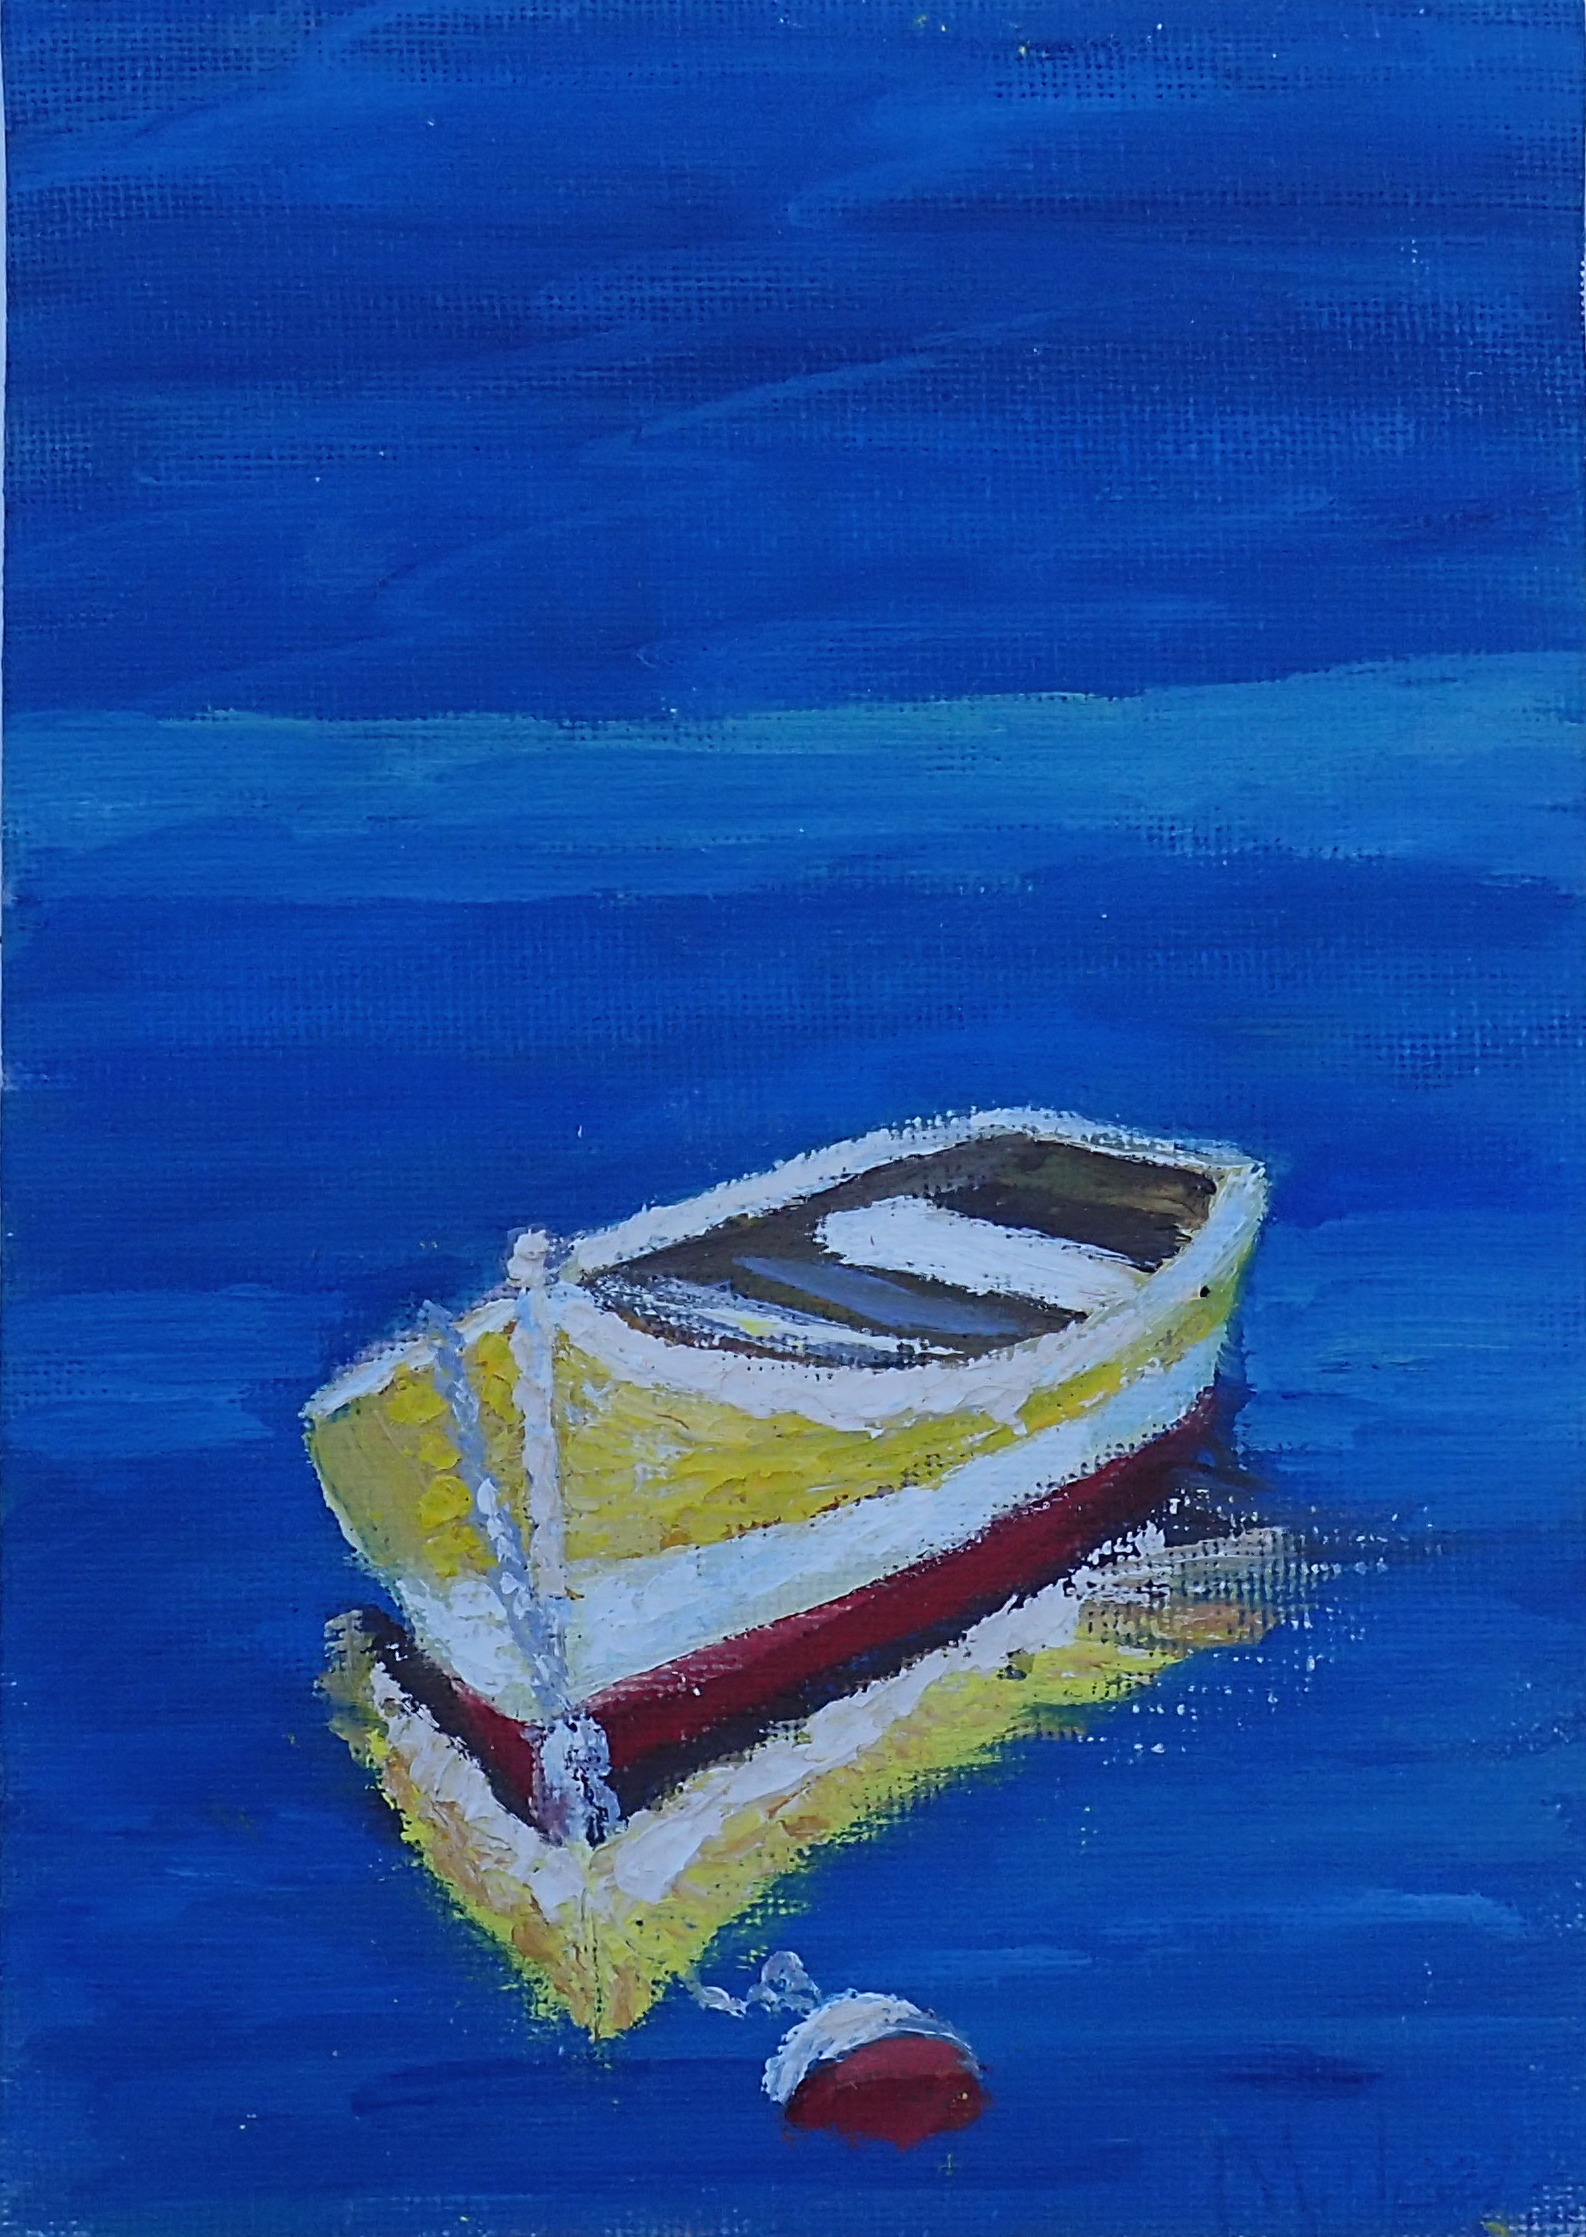 The sailor can feel reassurance when the shore dinghy rests at a mooring buoy when the crew is racing. This is a palette knife painting on canvas with wood backing. 